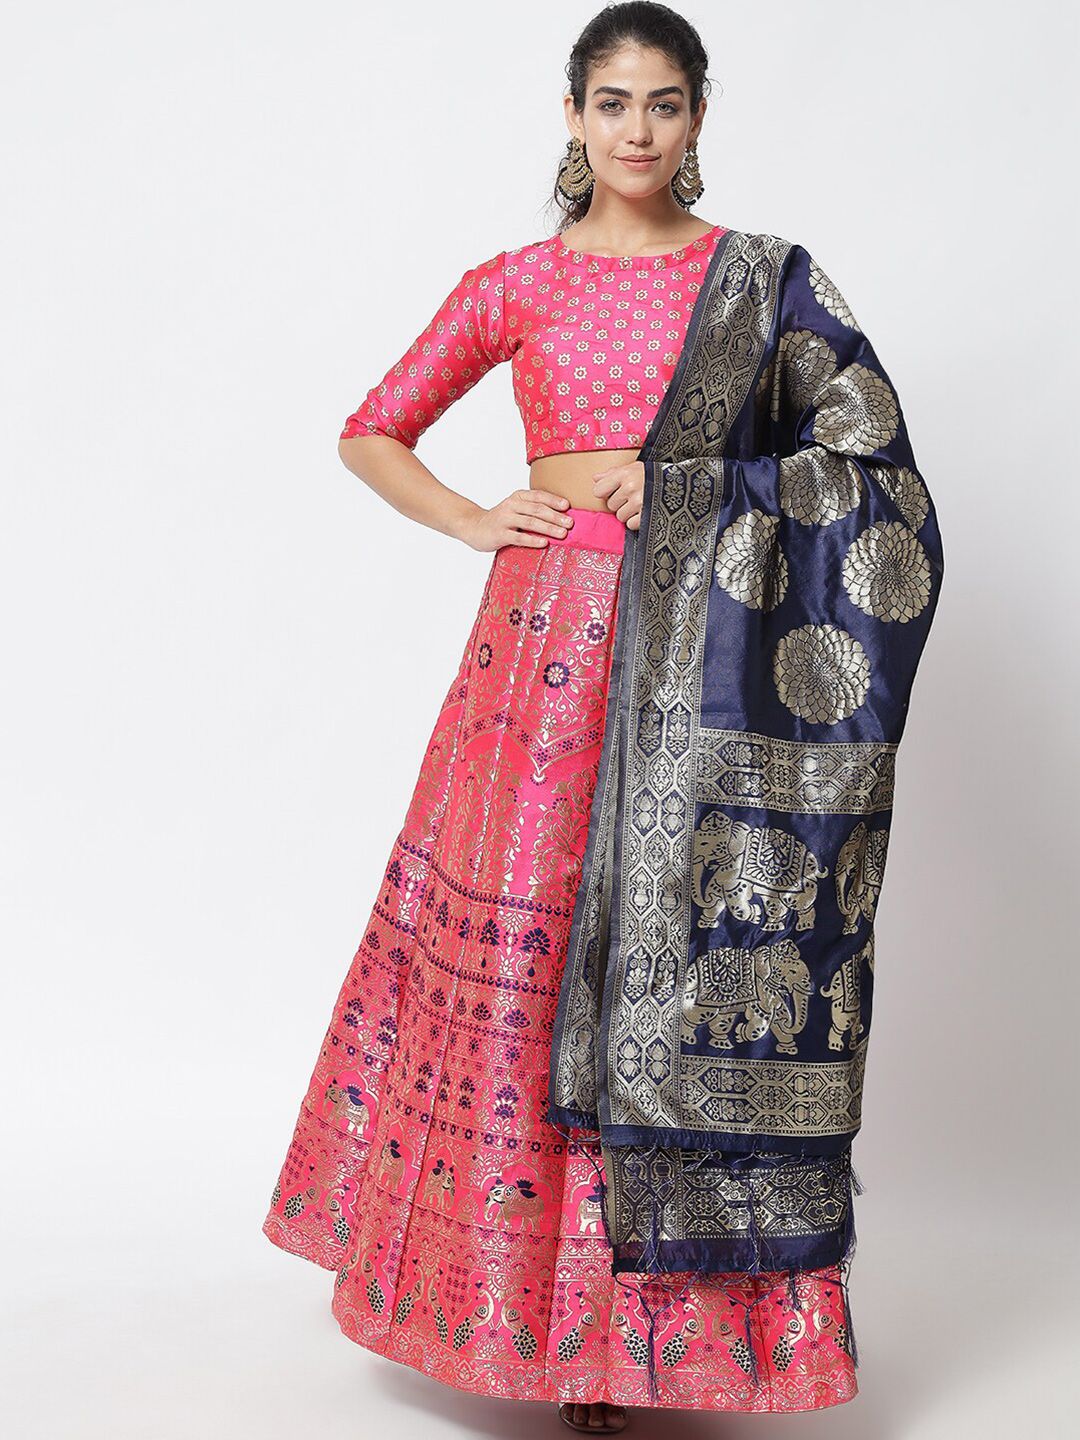 DIVASTRI Pink & Navy Blue Semi-Stitched Lehenga & Unstitched Blouse With Dupatta Price in India